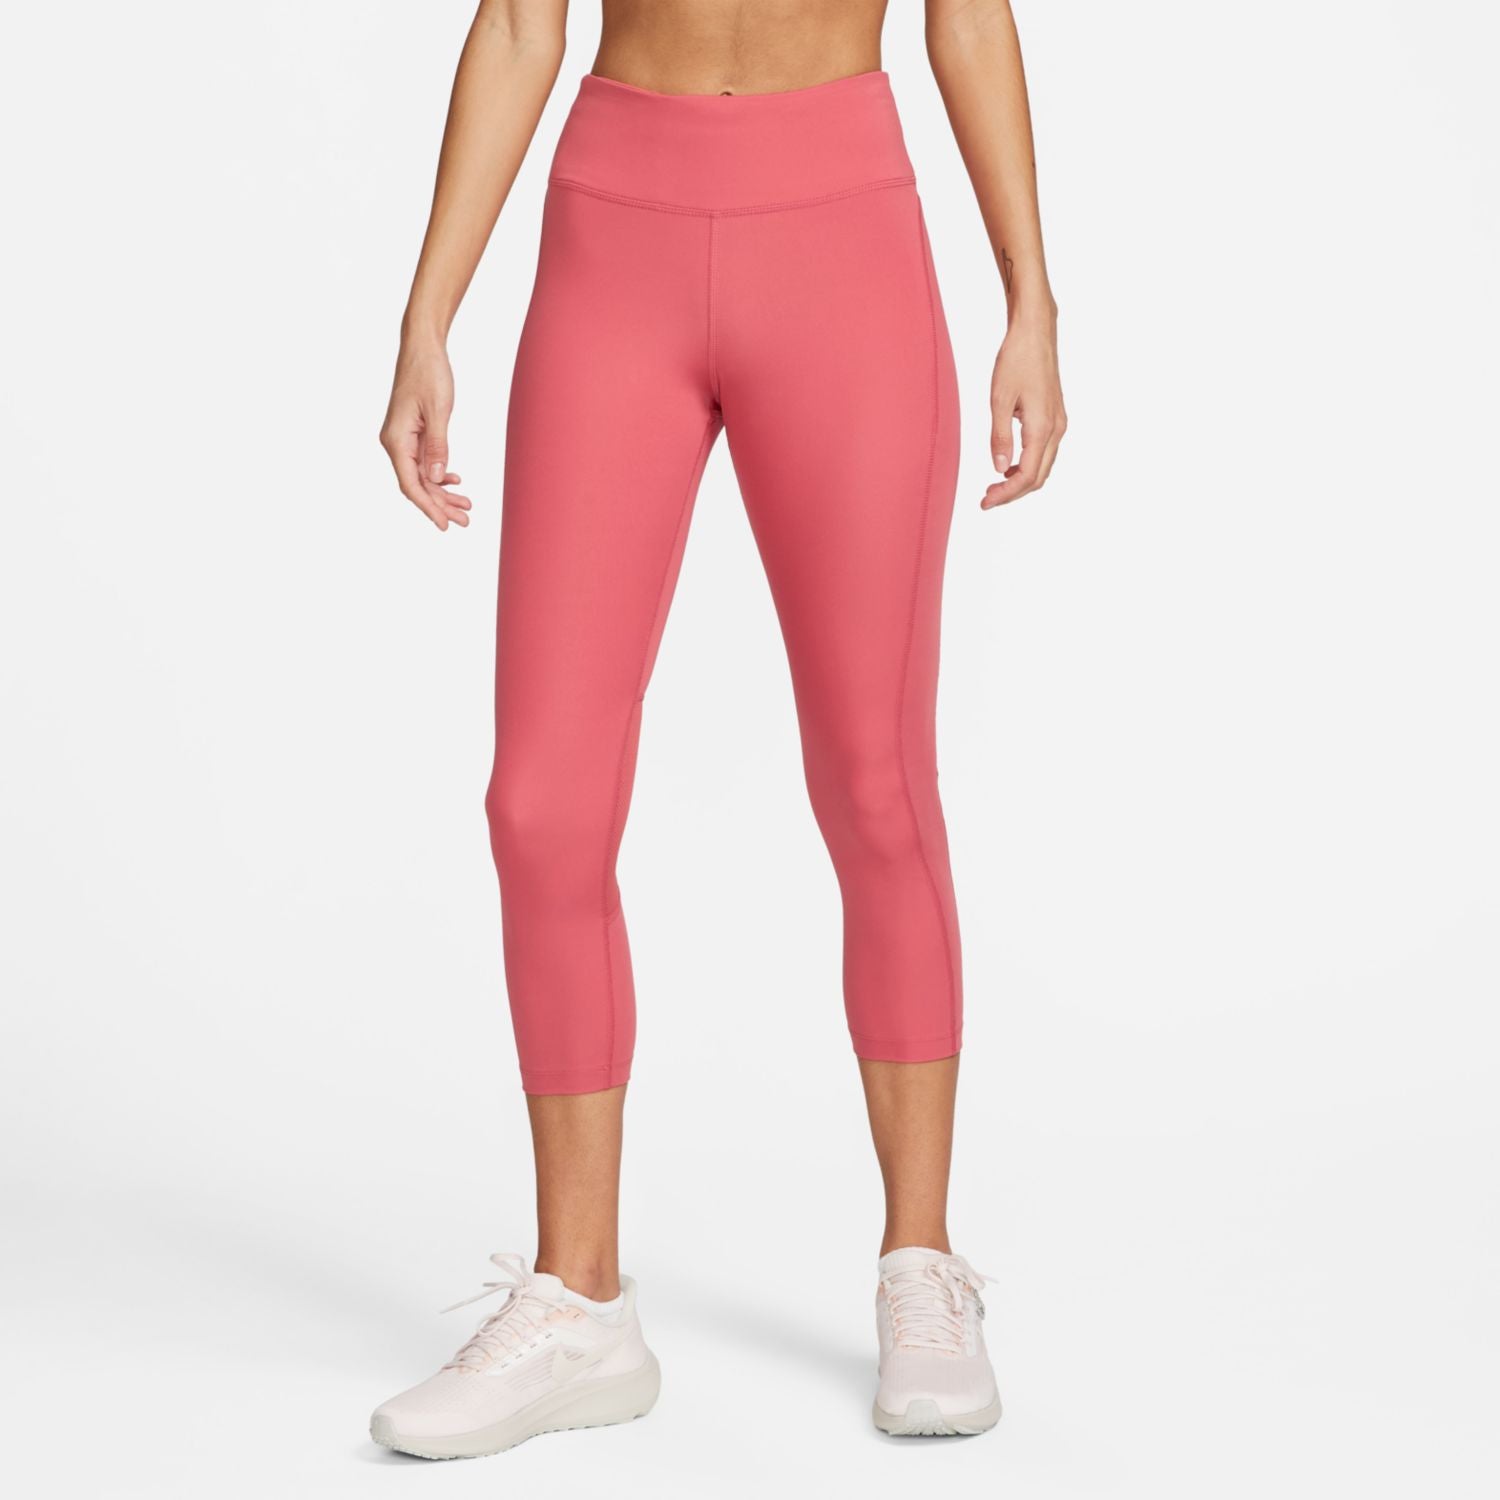 Buy Nike Epic Fast Running Tights (CZ9240) sangria from £27.99 (Today) –  Best Deals on